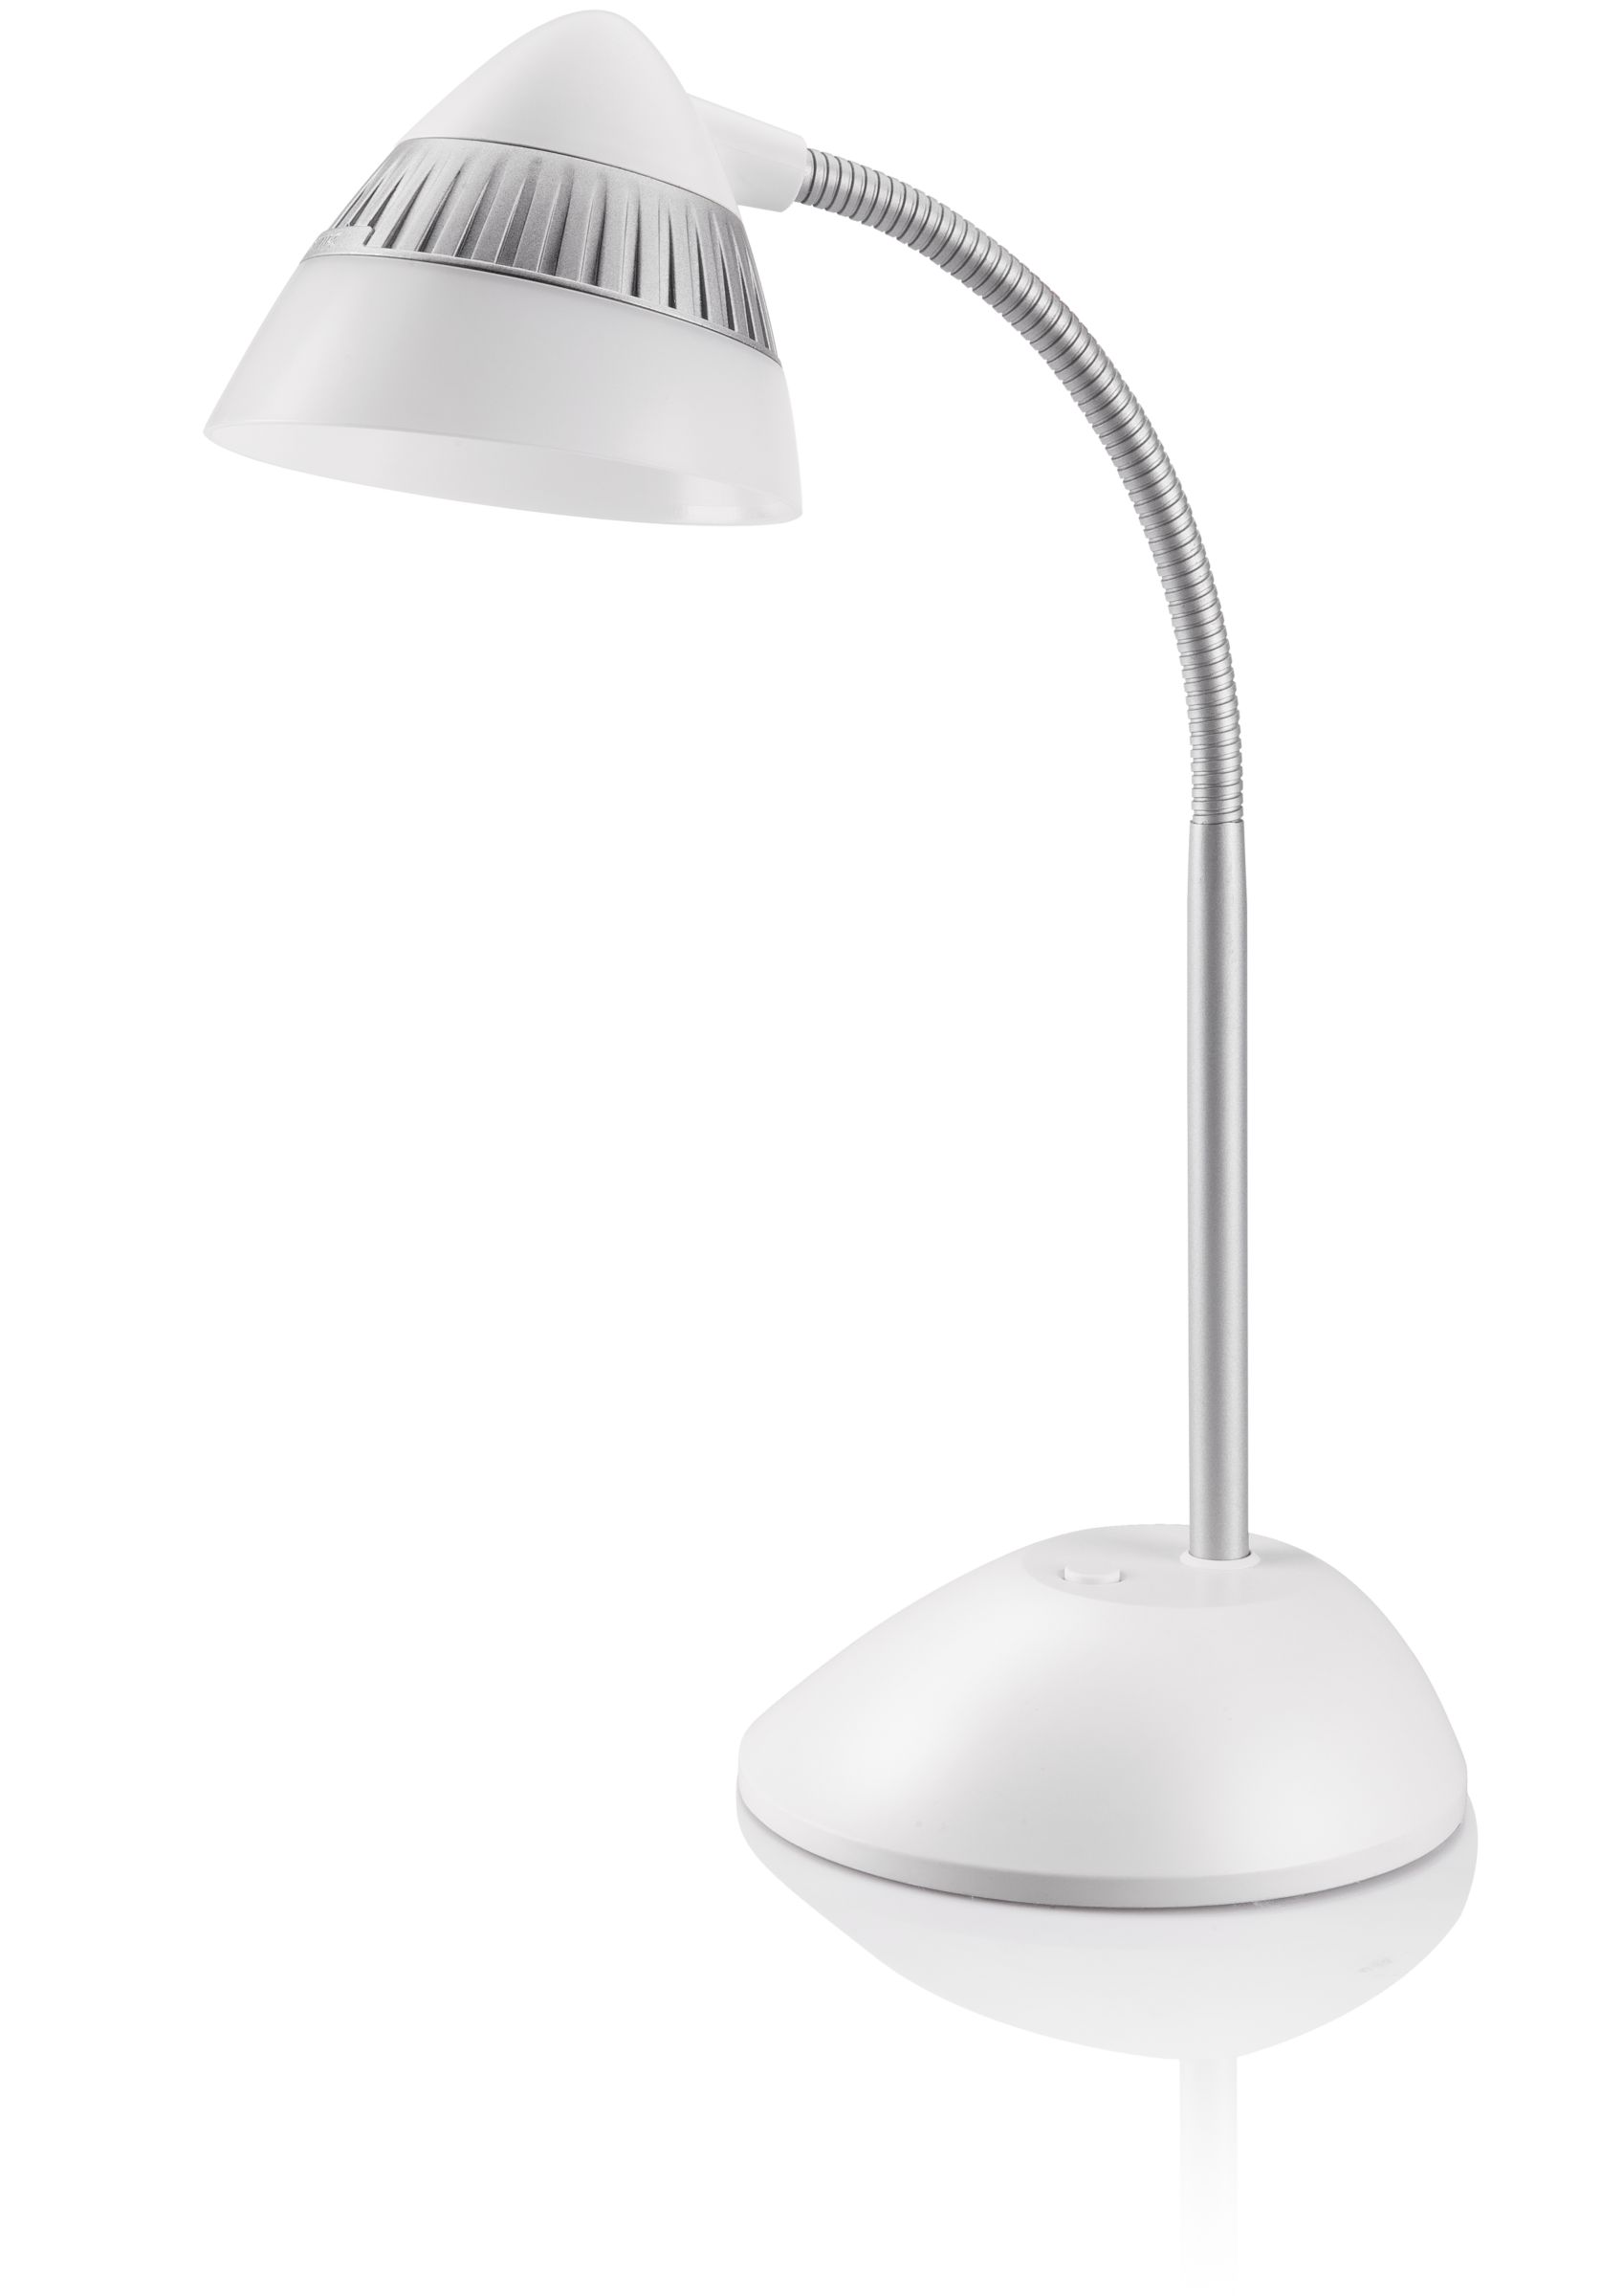 philips lamp table